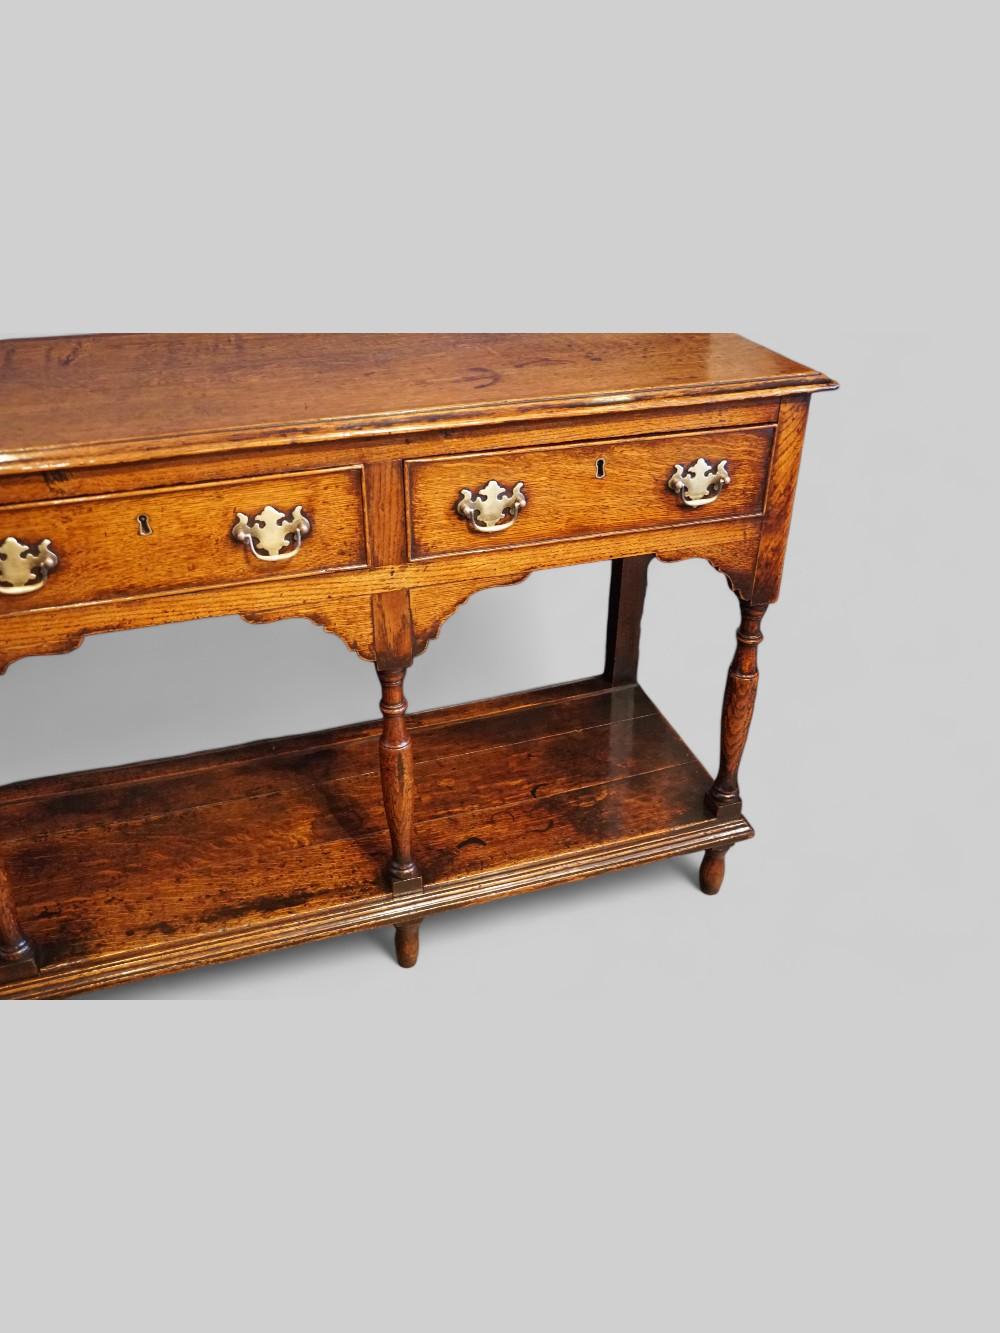 Antique oak dresser with pot board 
This Antique oak dresser with pot board was made circa 1825.
This is of a superb golden colour and patina, and the front turned legs are particularly fine.
It is fitted 3 drawers with brass plate handles.
The fine